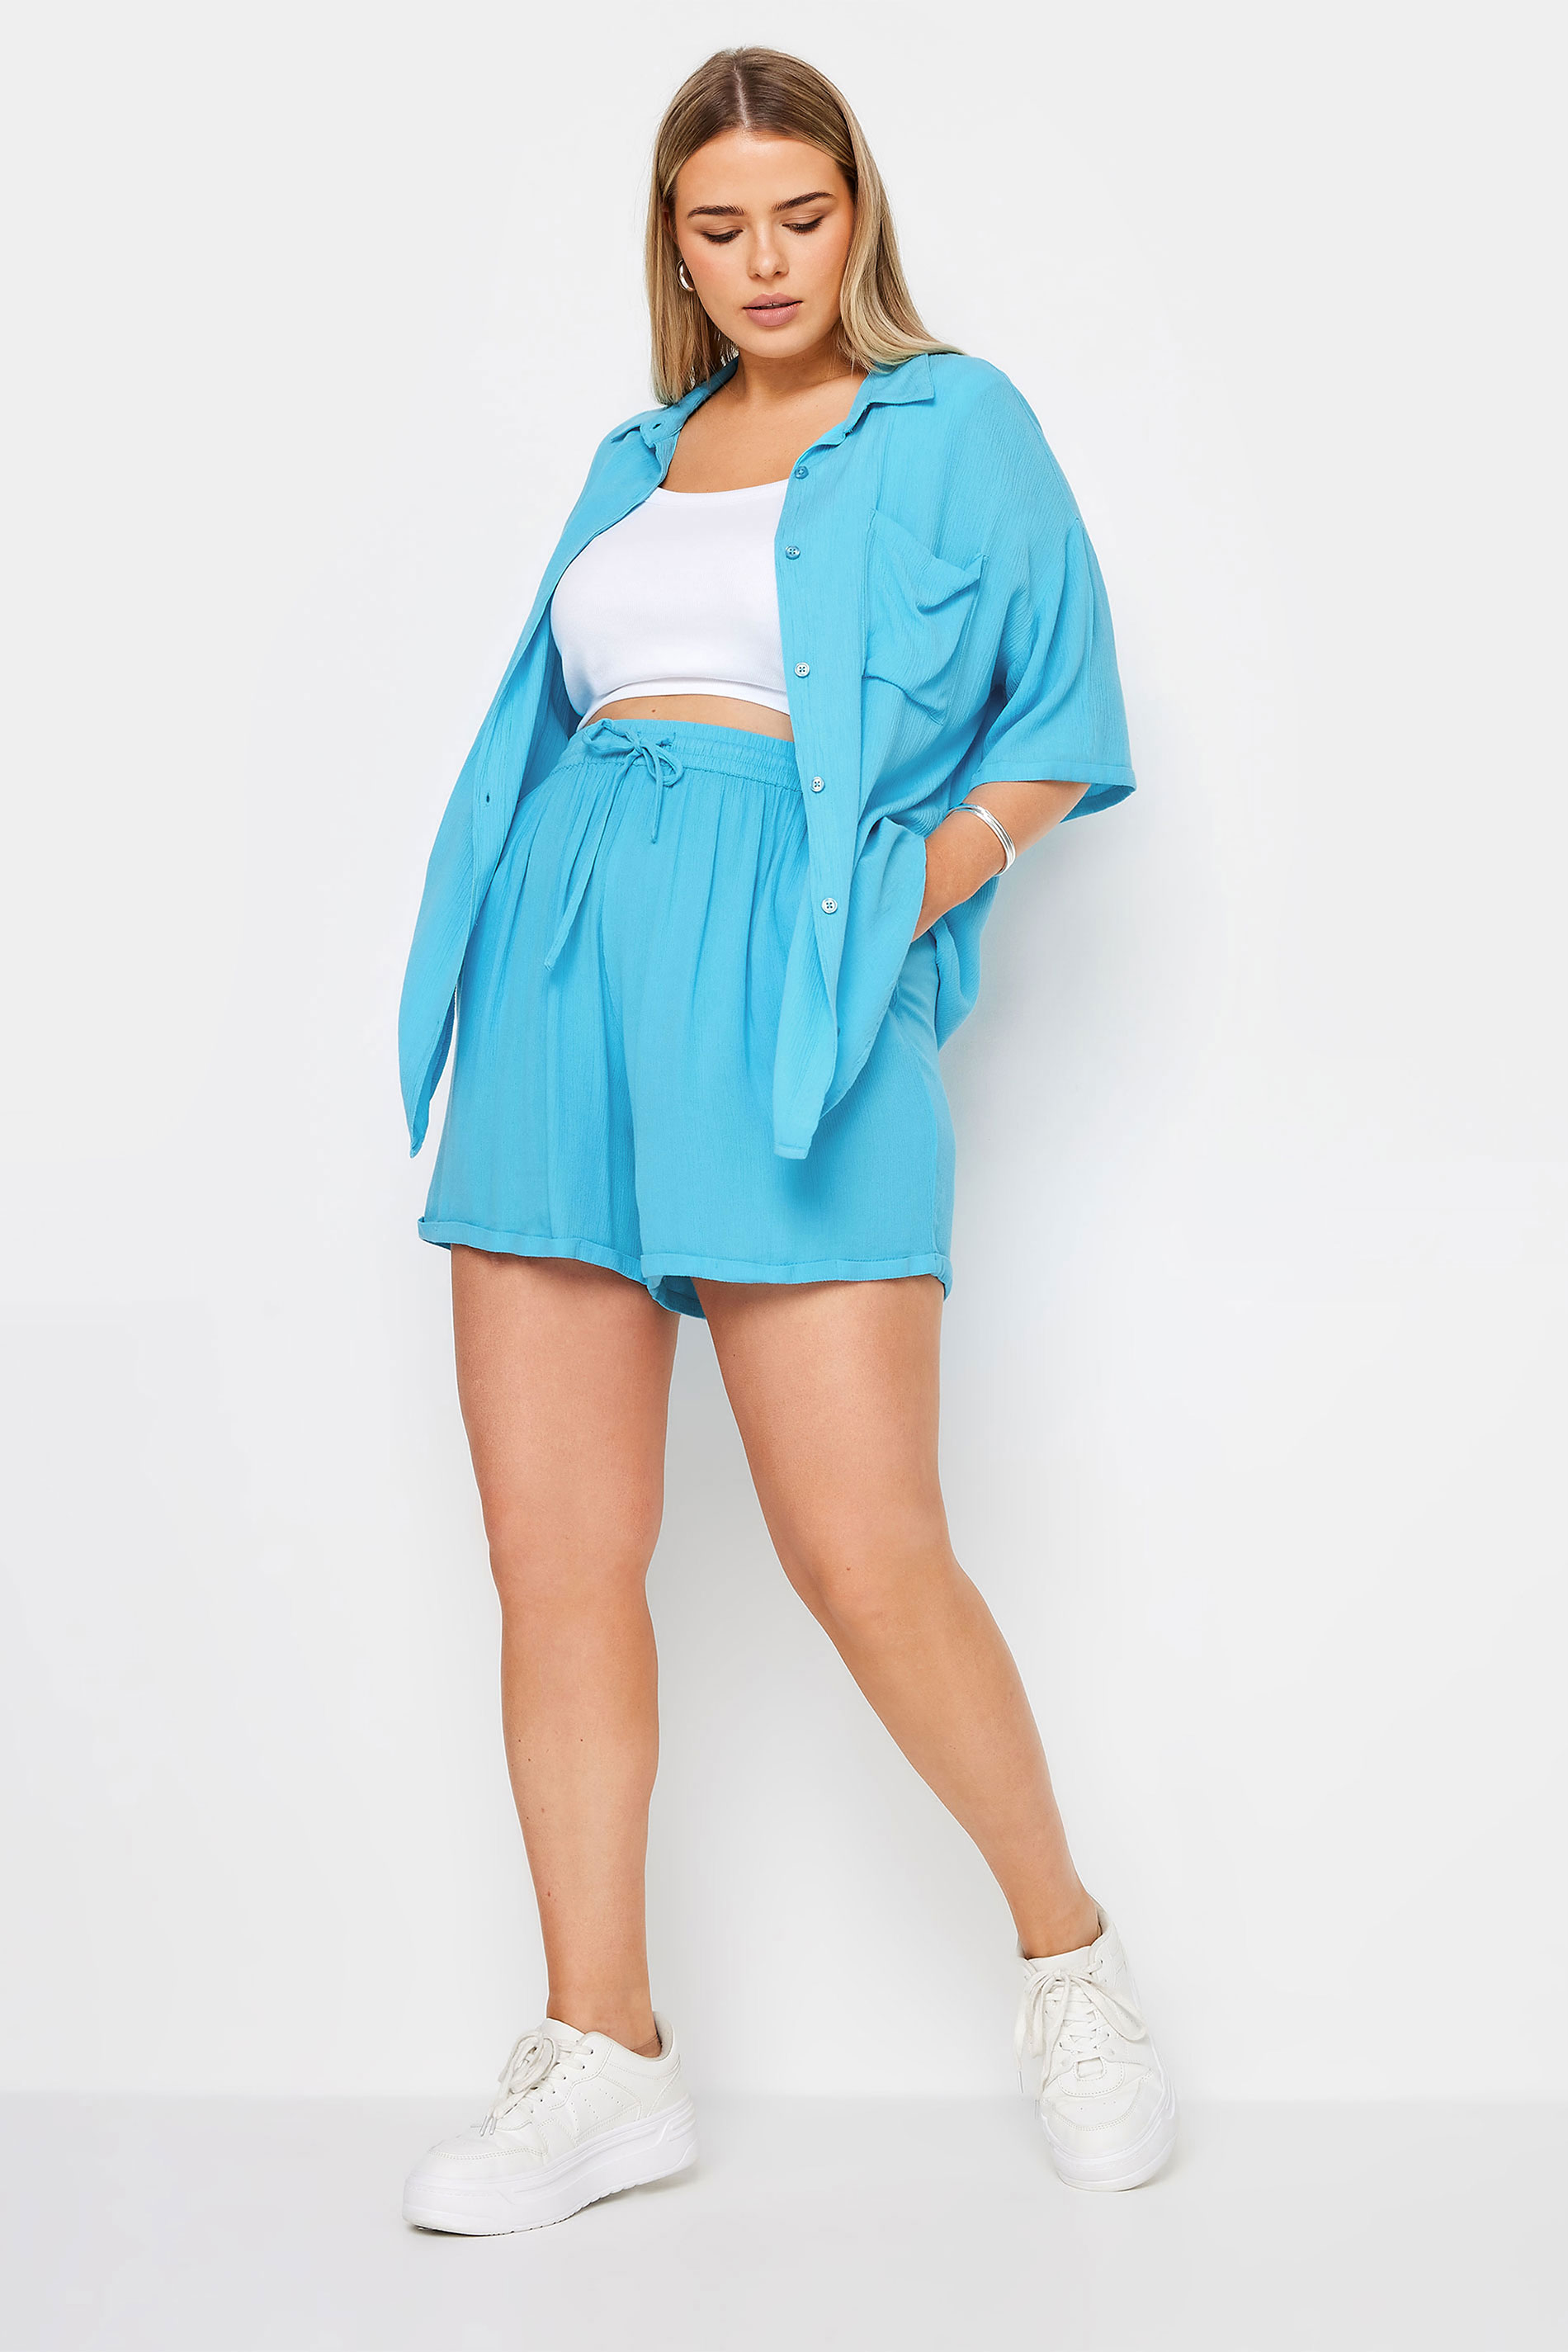 LIMITED COLLECTION Plus Size Blue Crinkle Shirt | Yours Clothing 3